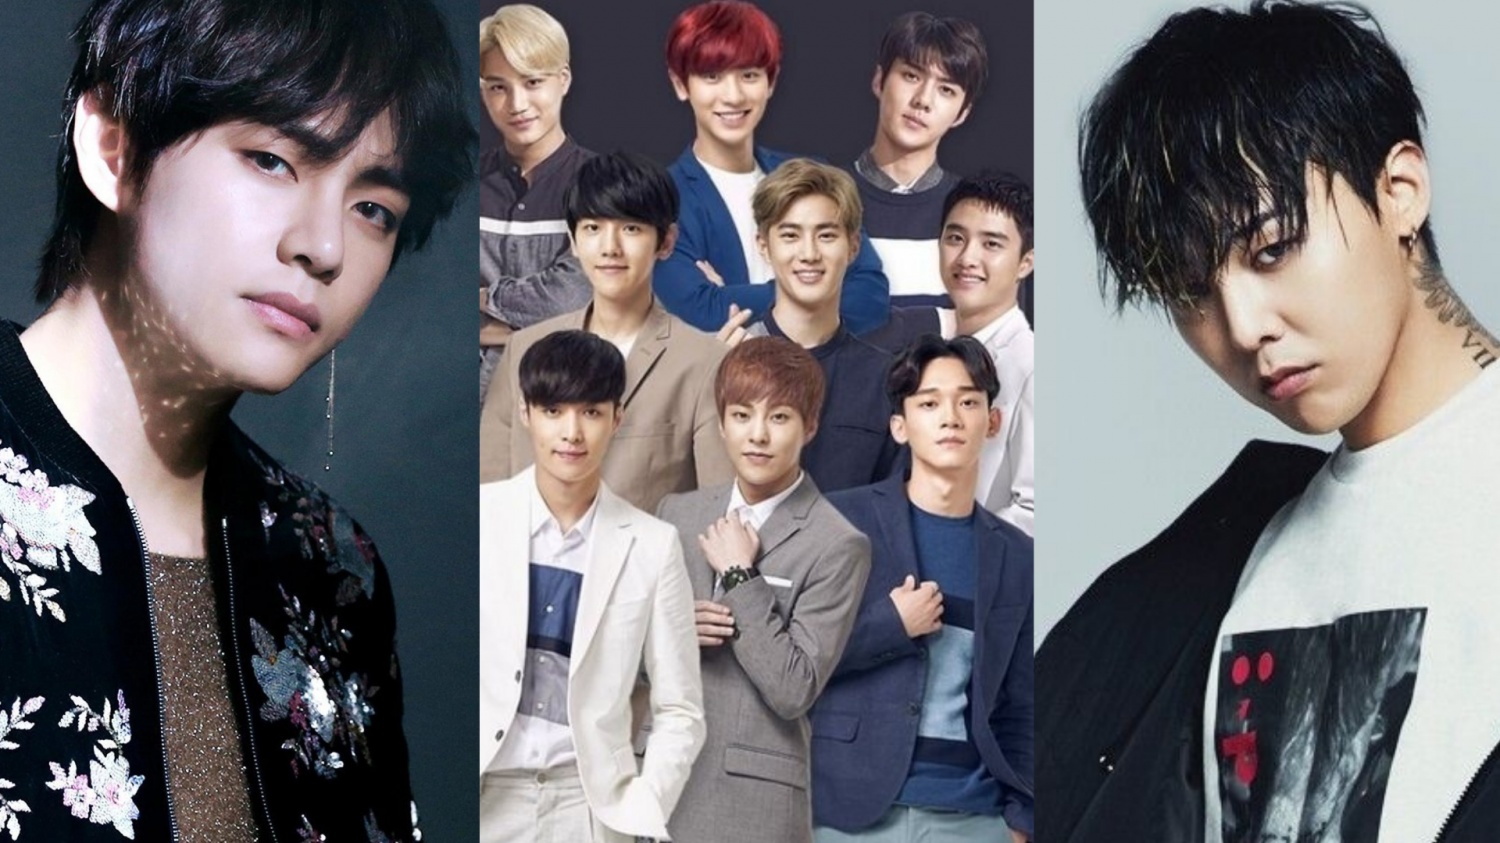 Here Are The Most Popular Male KPop Groups and Idols on